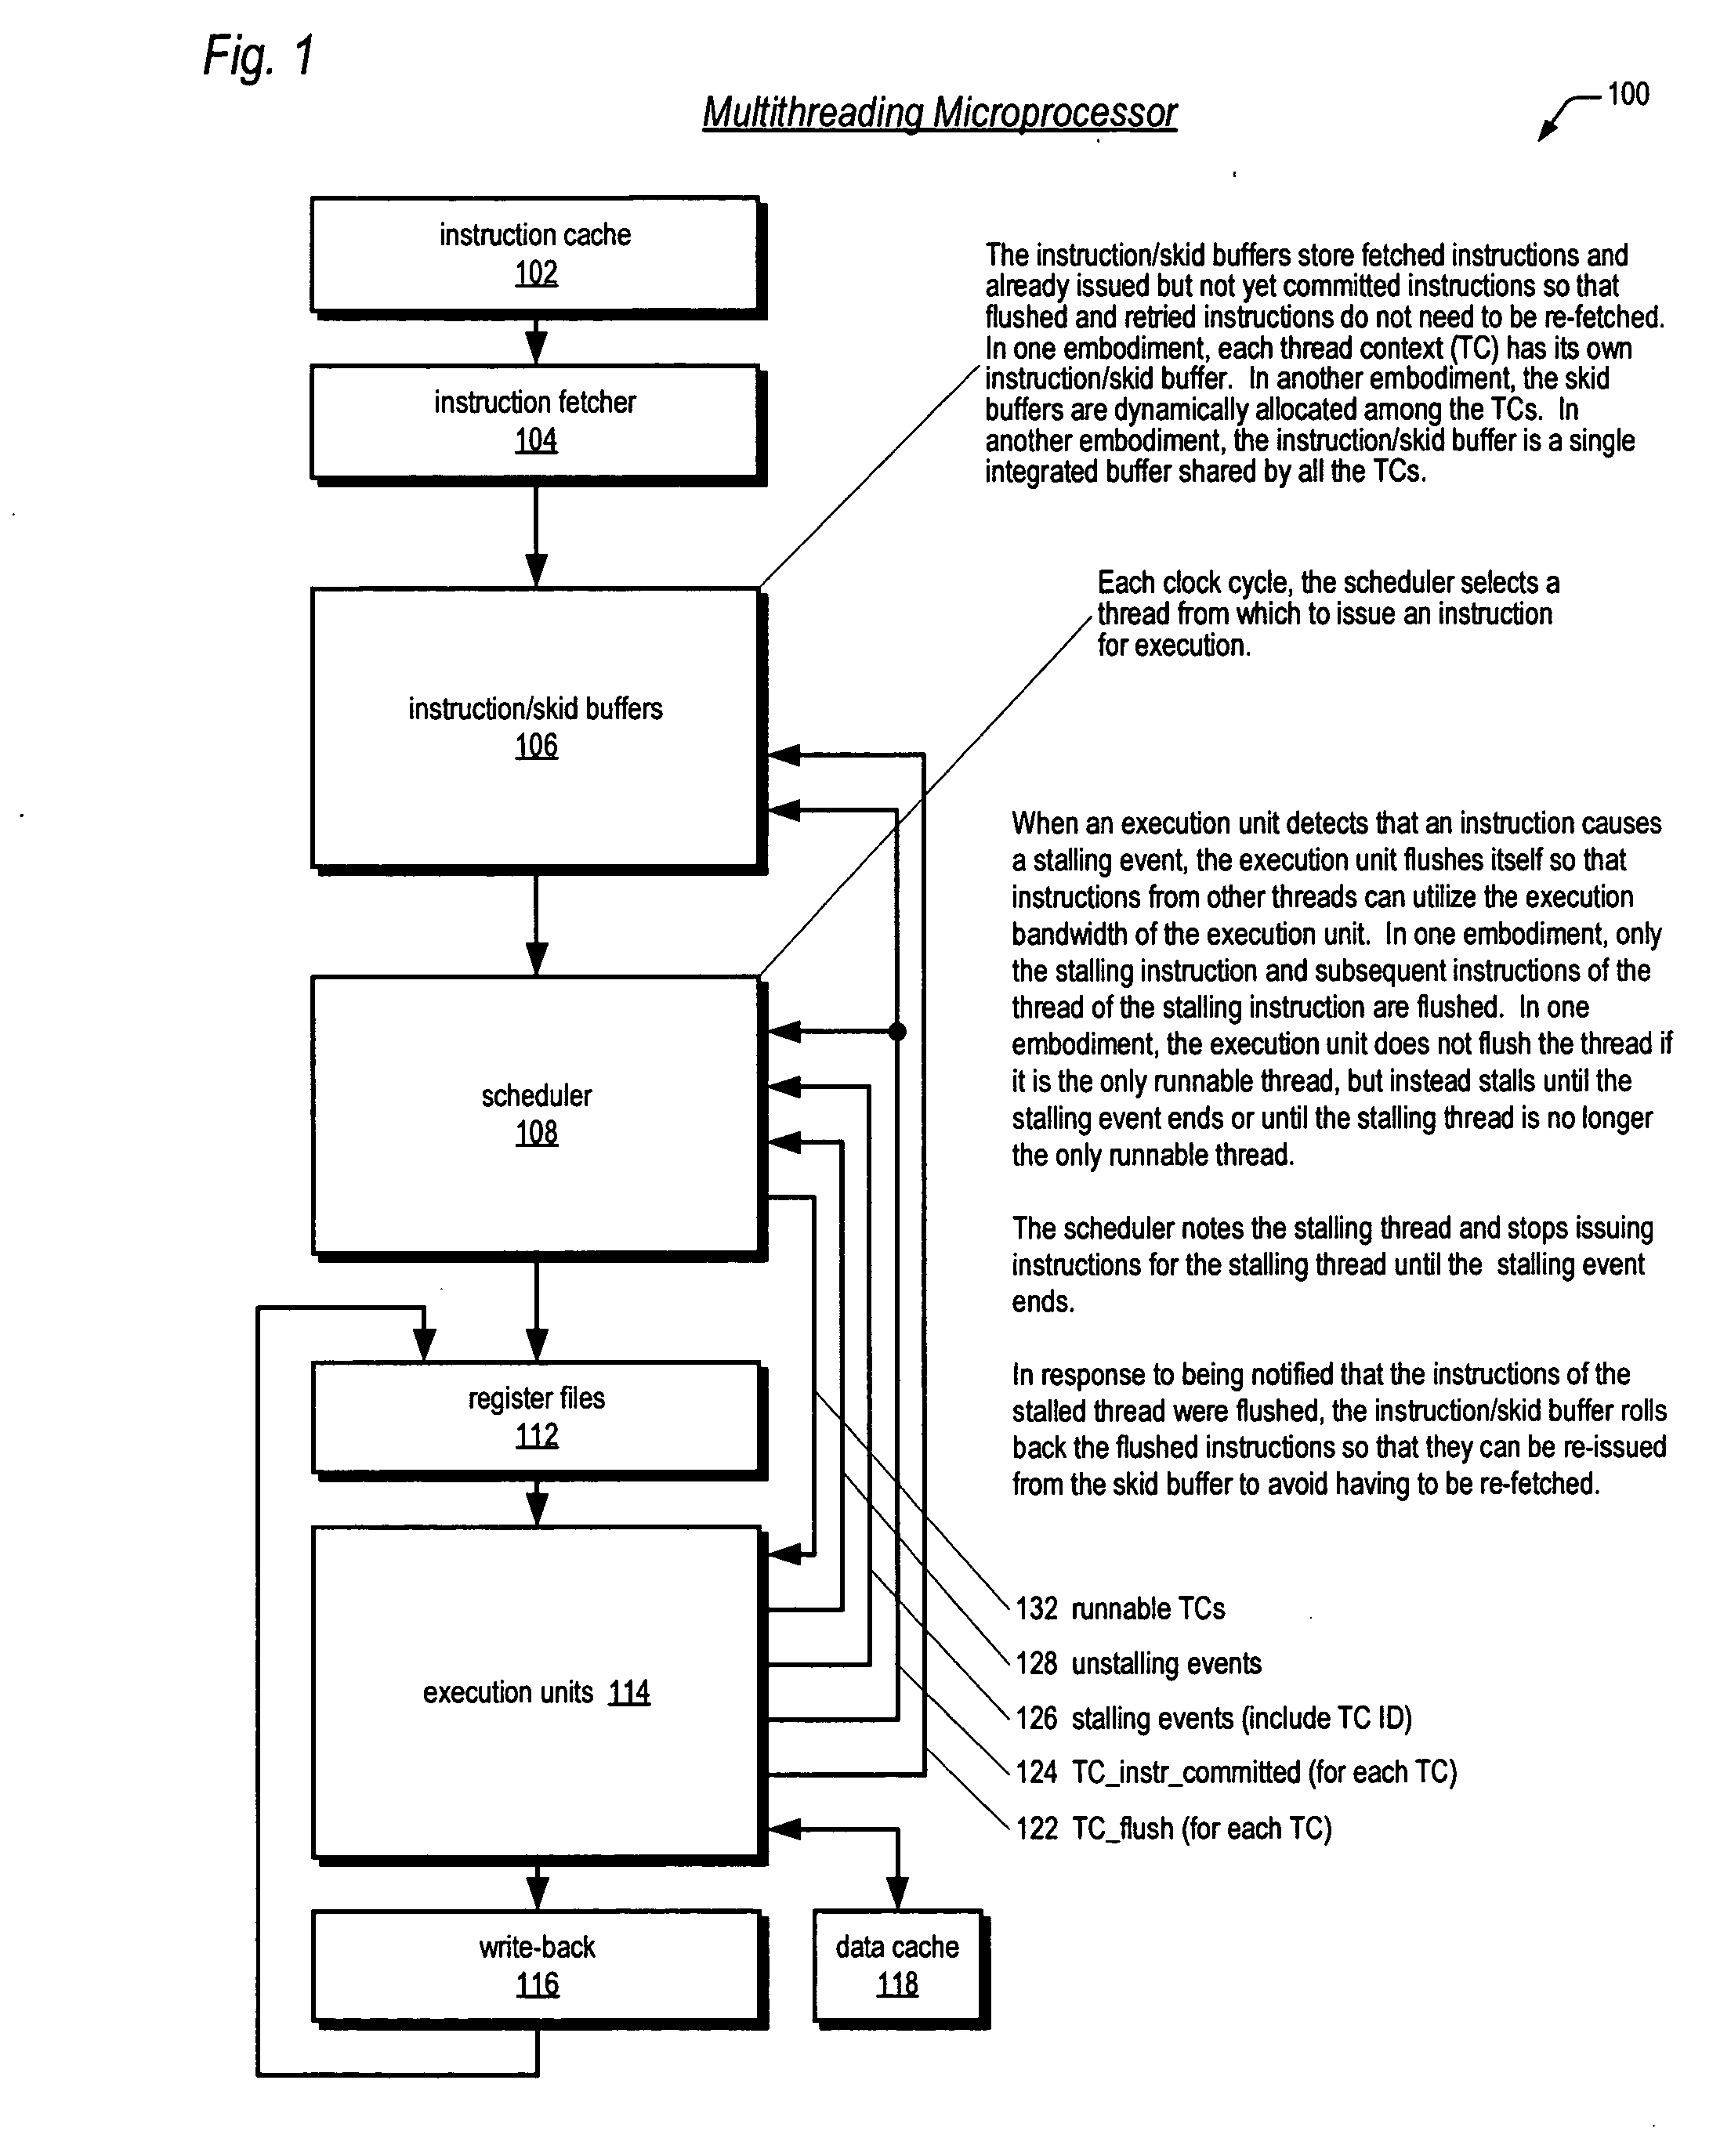 Barrel-incrementer-based round-robin apparatus and instruction dispatch scheduler employing same for use in multithreading microprocessor